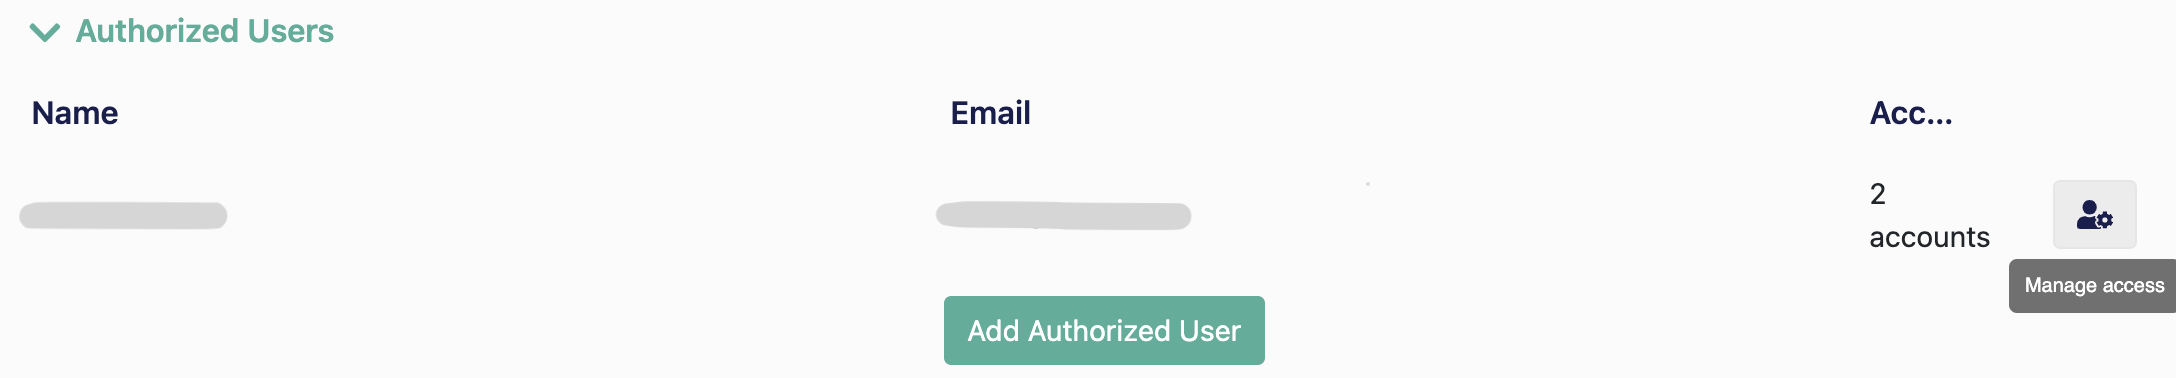 alter the control of an authorized user